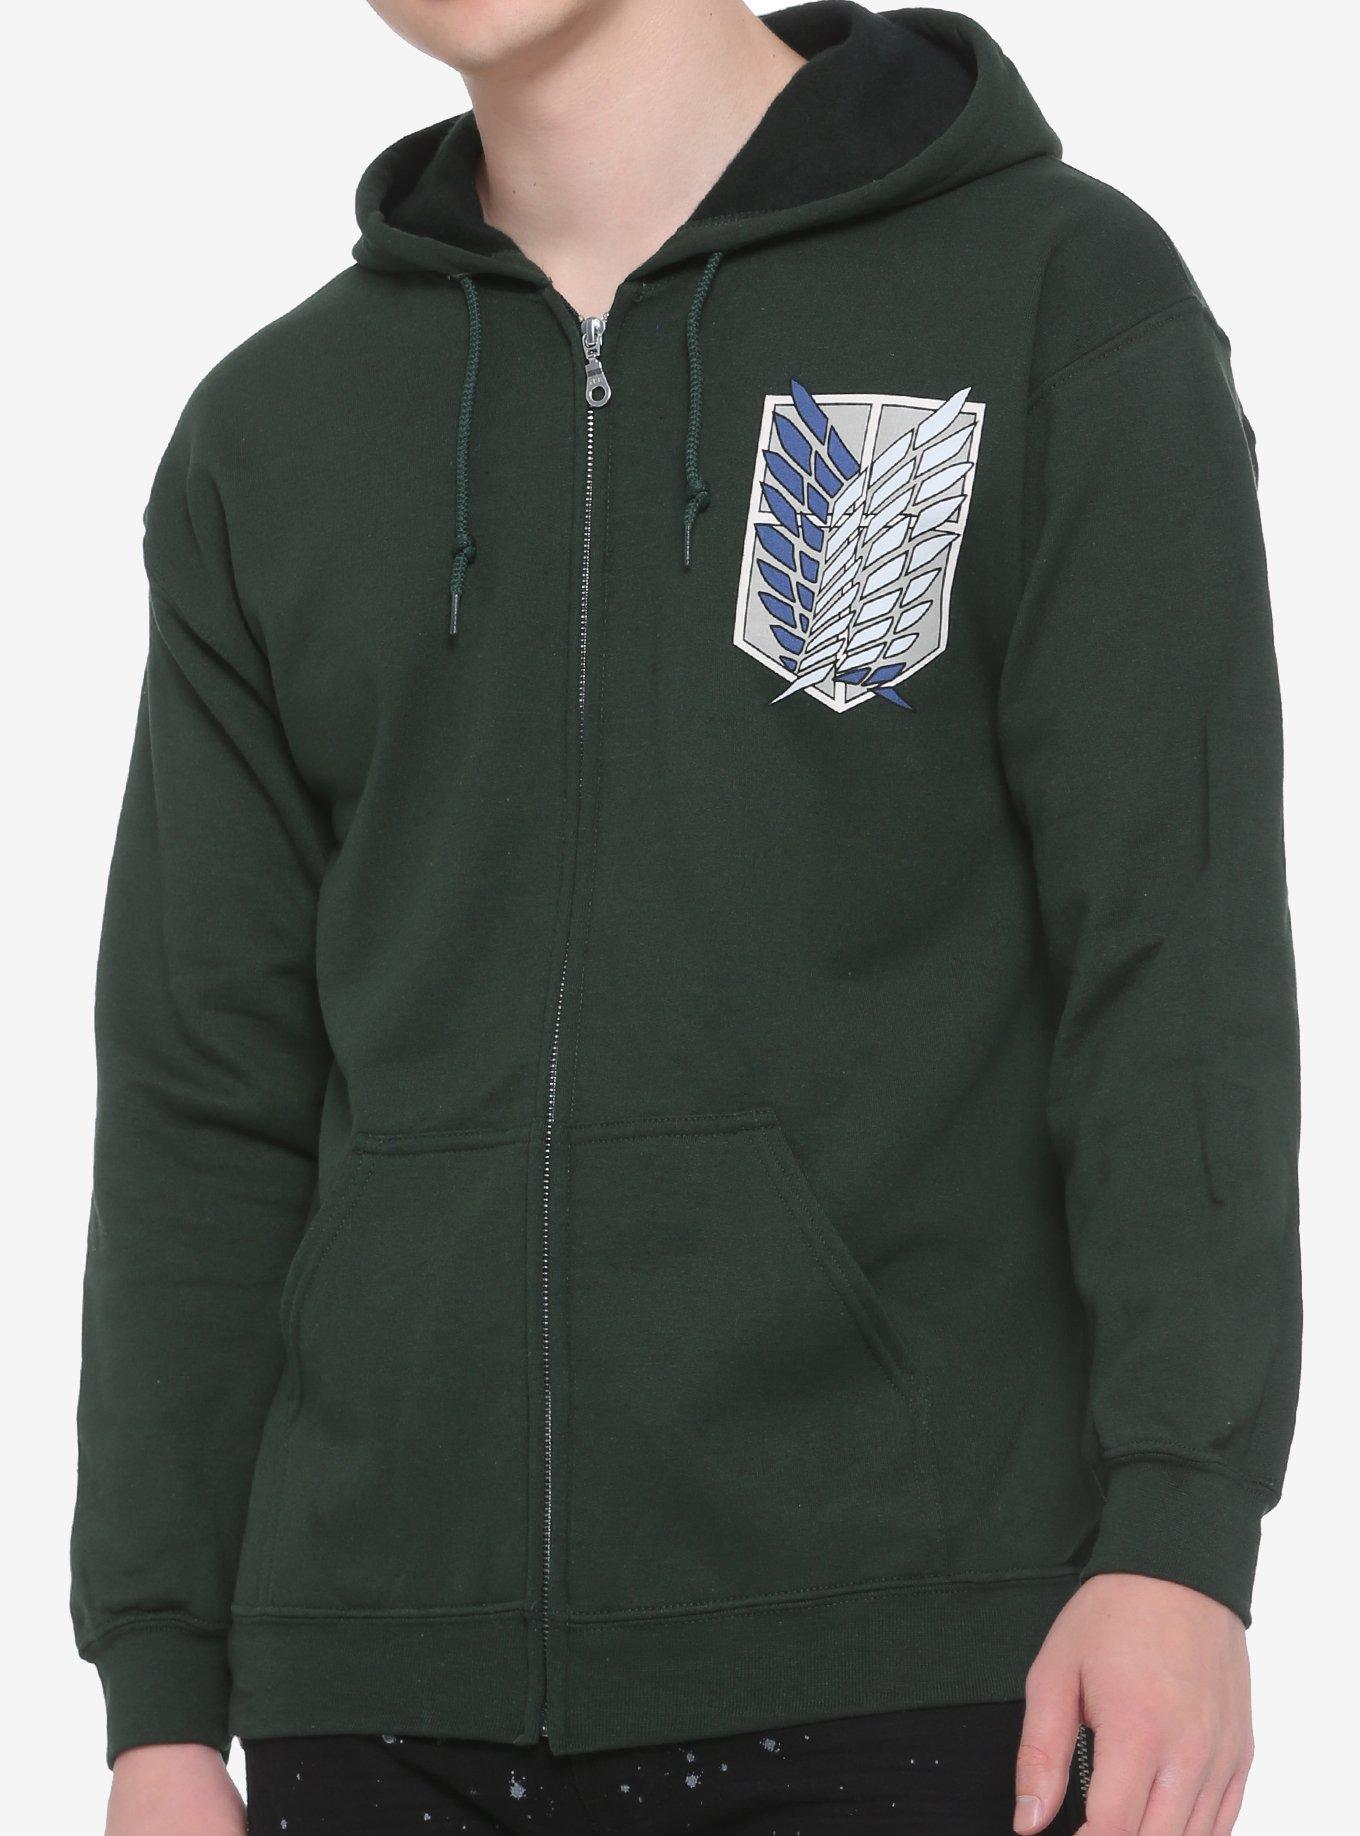 Attack on Titan Scout Regiment hoodie www.ugel01ep.gob.pe